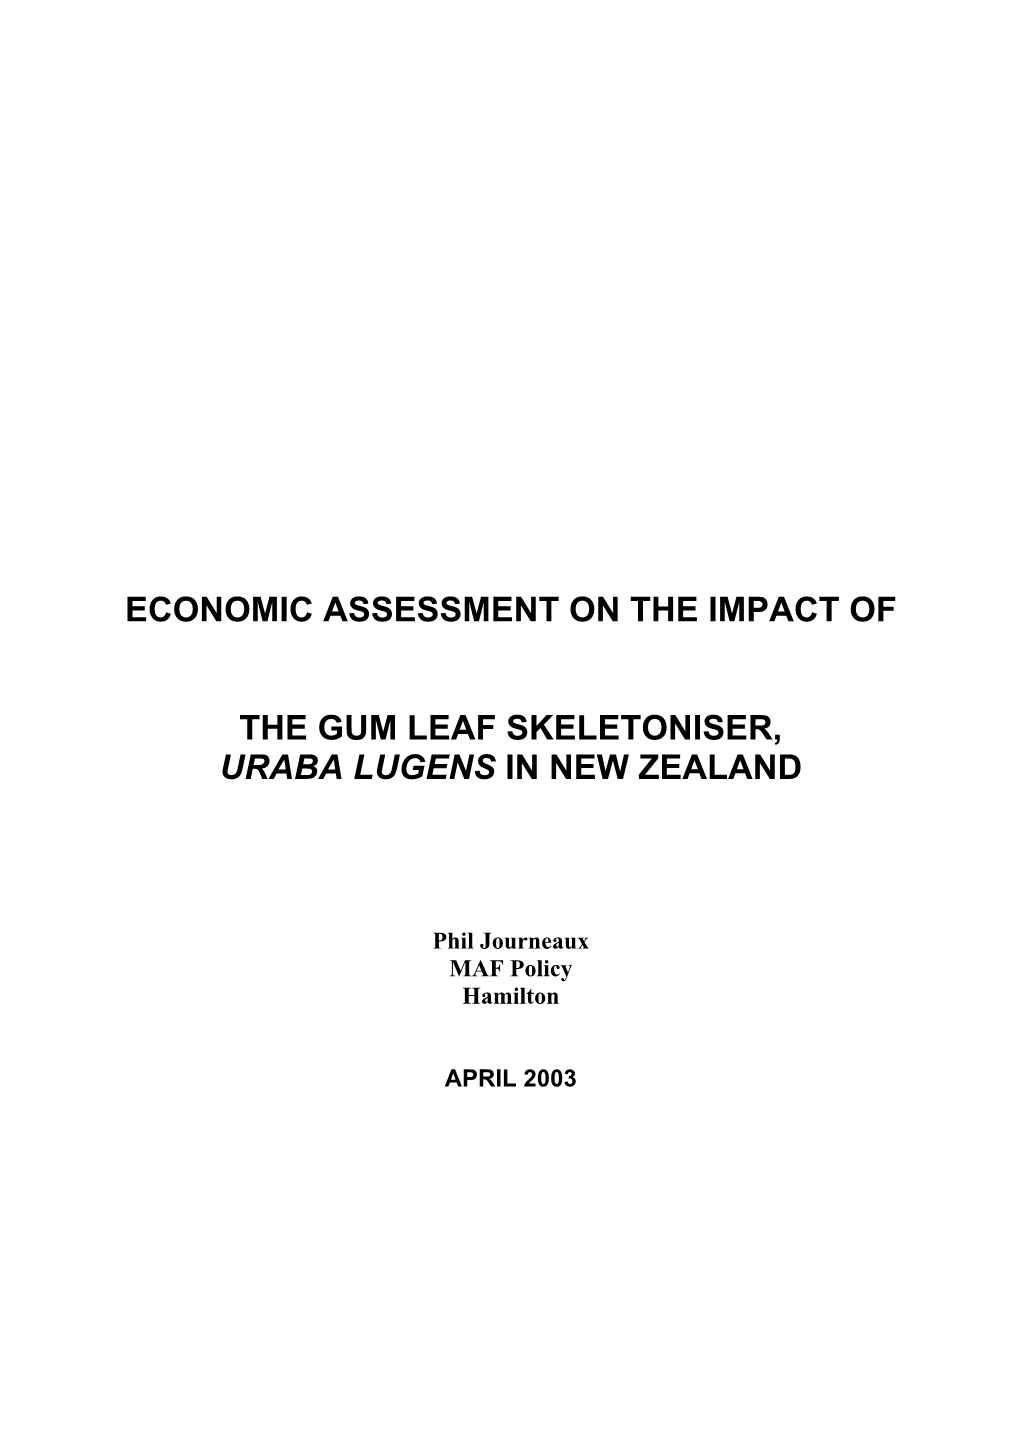 Economic Assessment on the Impact of the Gum Leaf